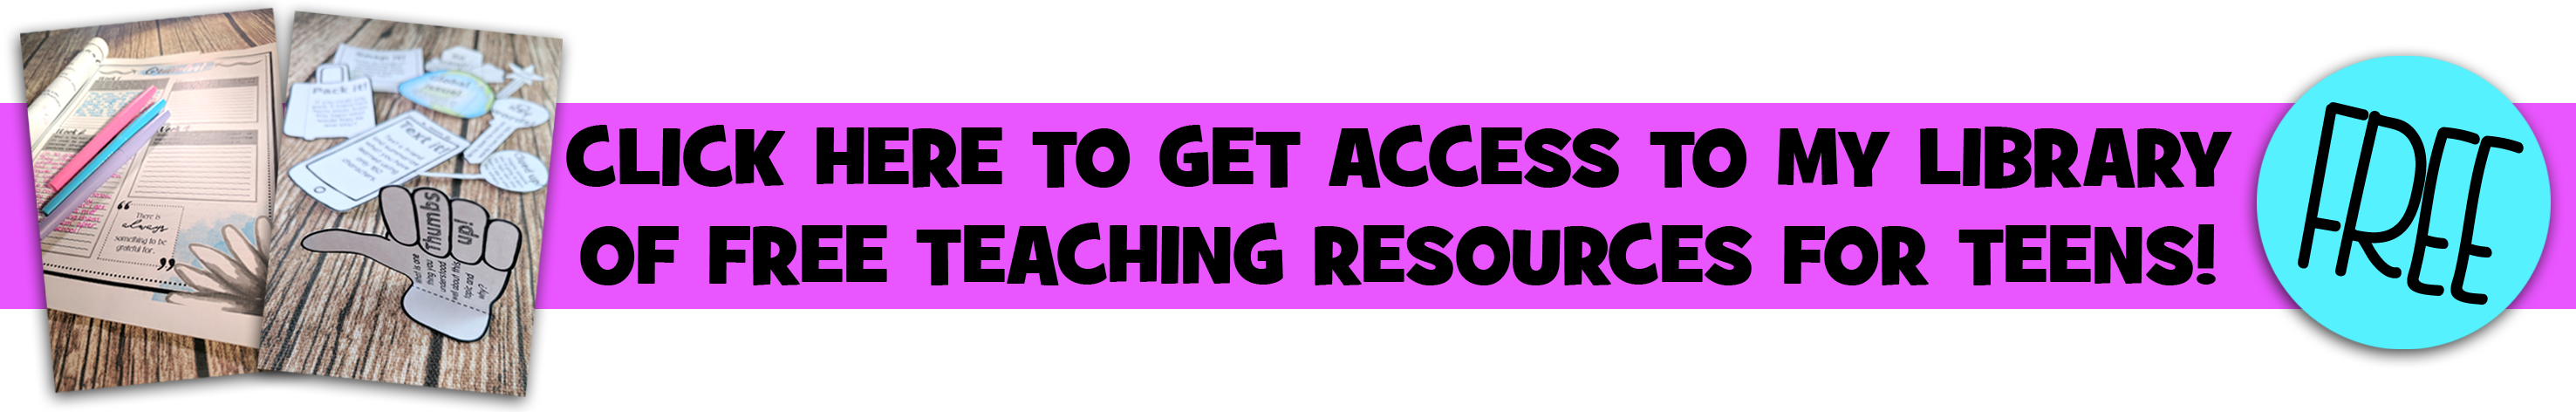 Free teaching resources for teens @resourceforce